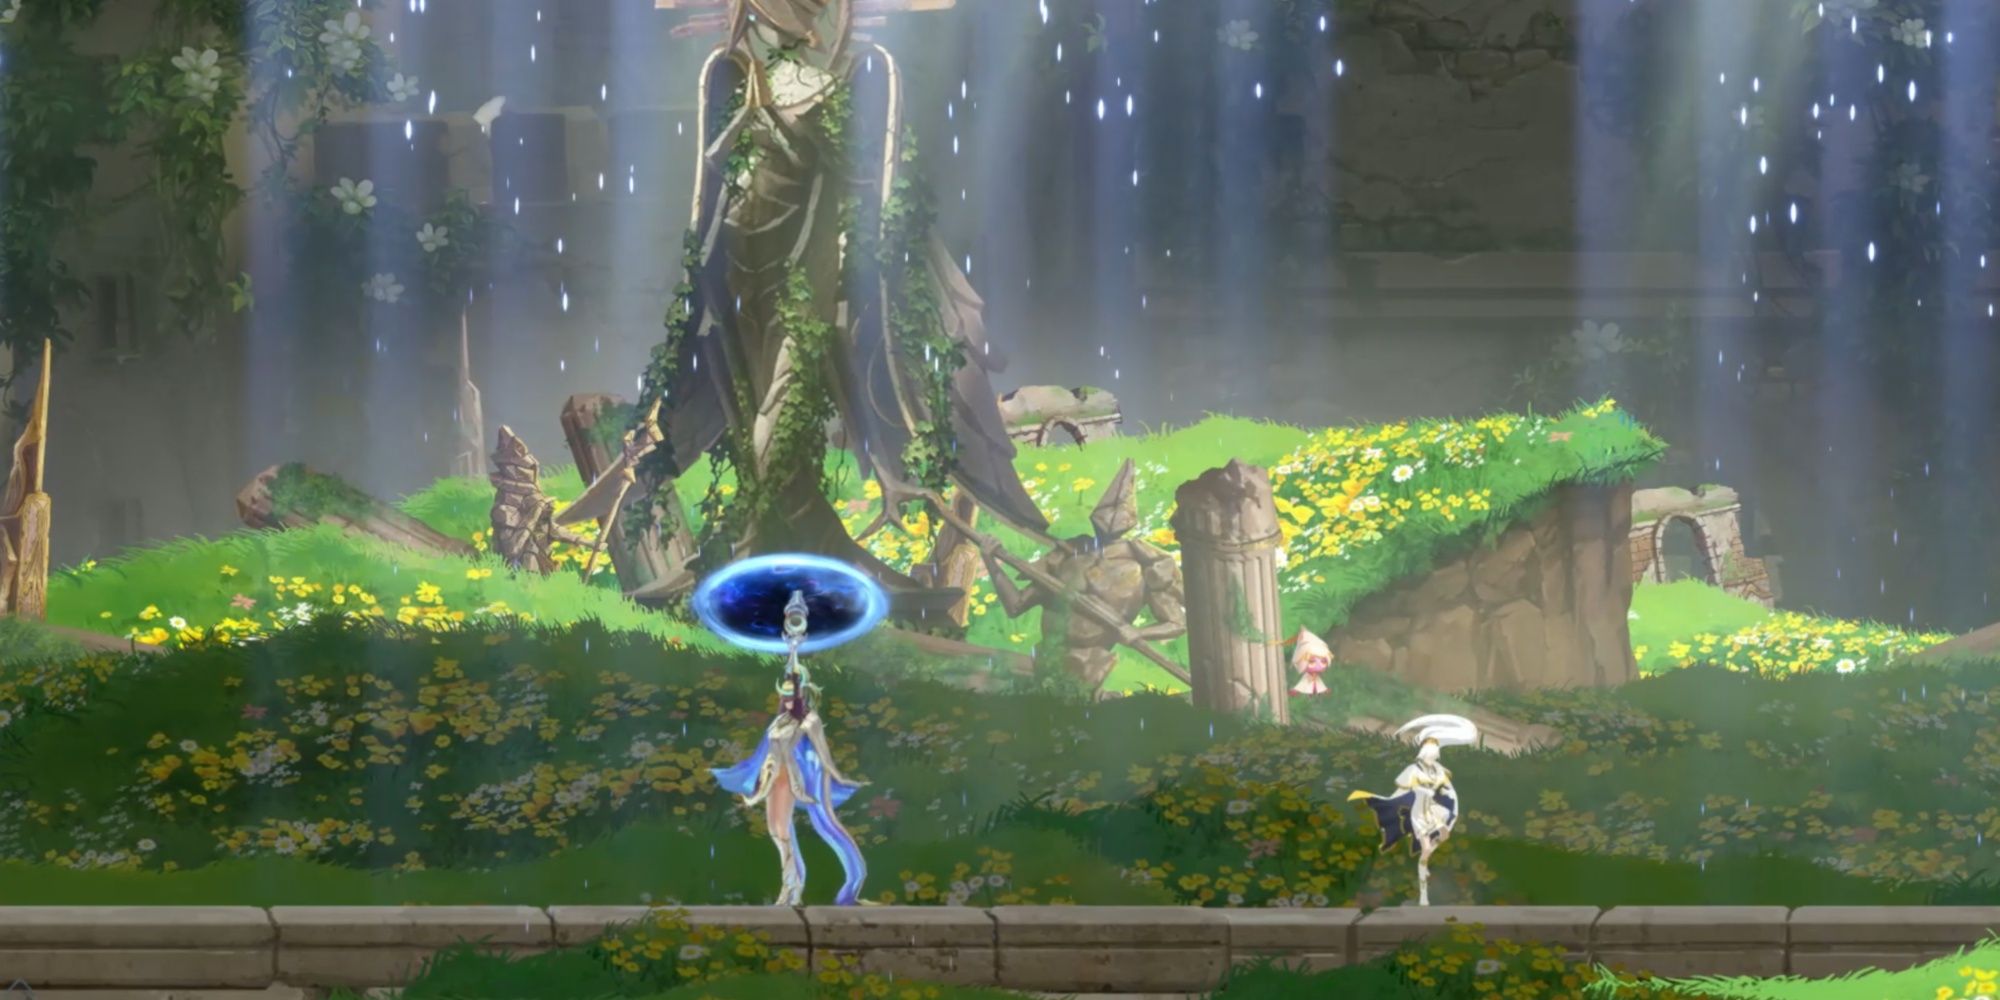 The Three Question Mark Boss plunging her sword in a portal above herself, creating an onslaught of Beams of Light to rain down from the sky, dealing mass damage in Afterimage